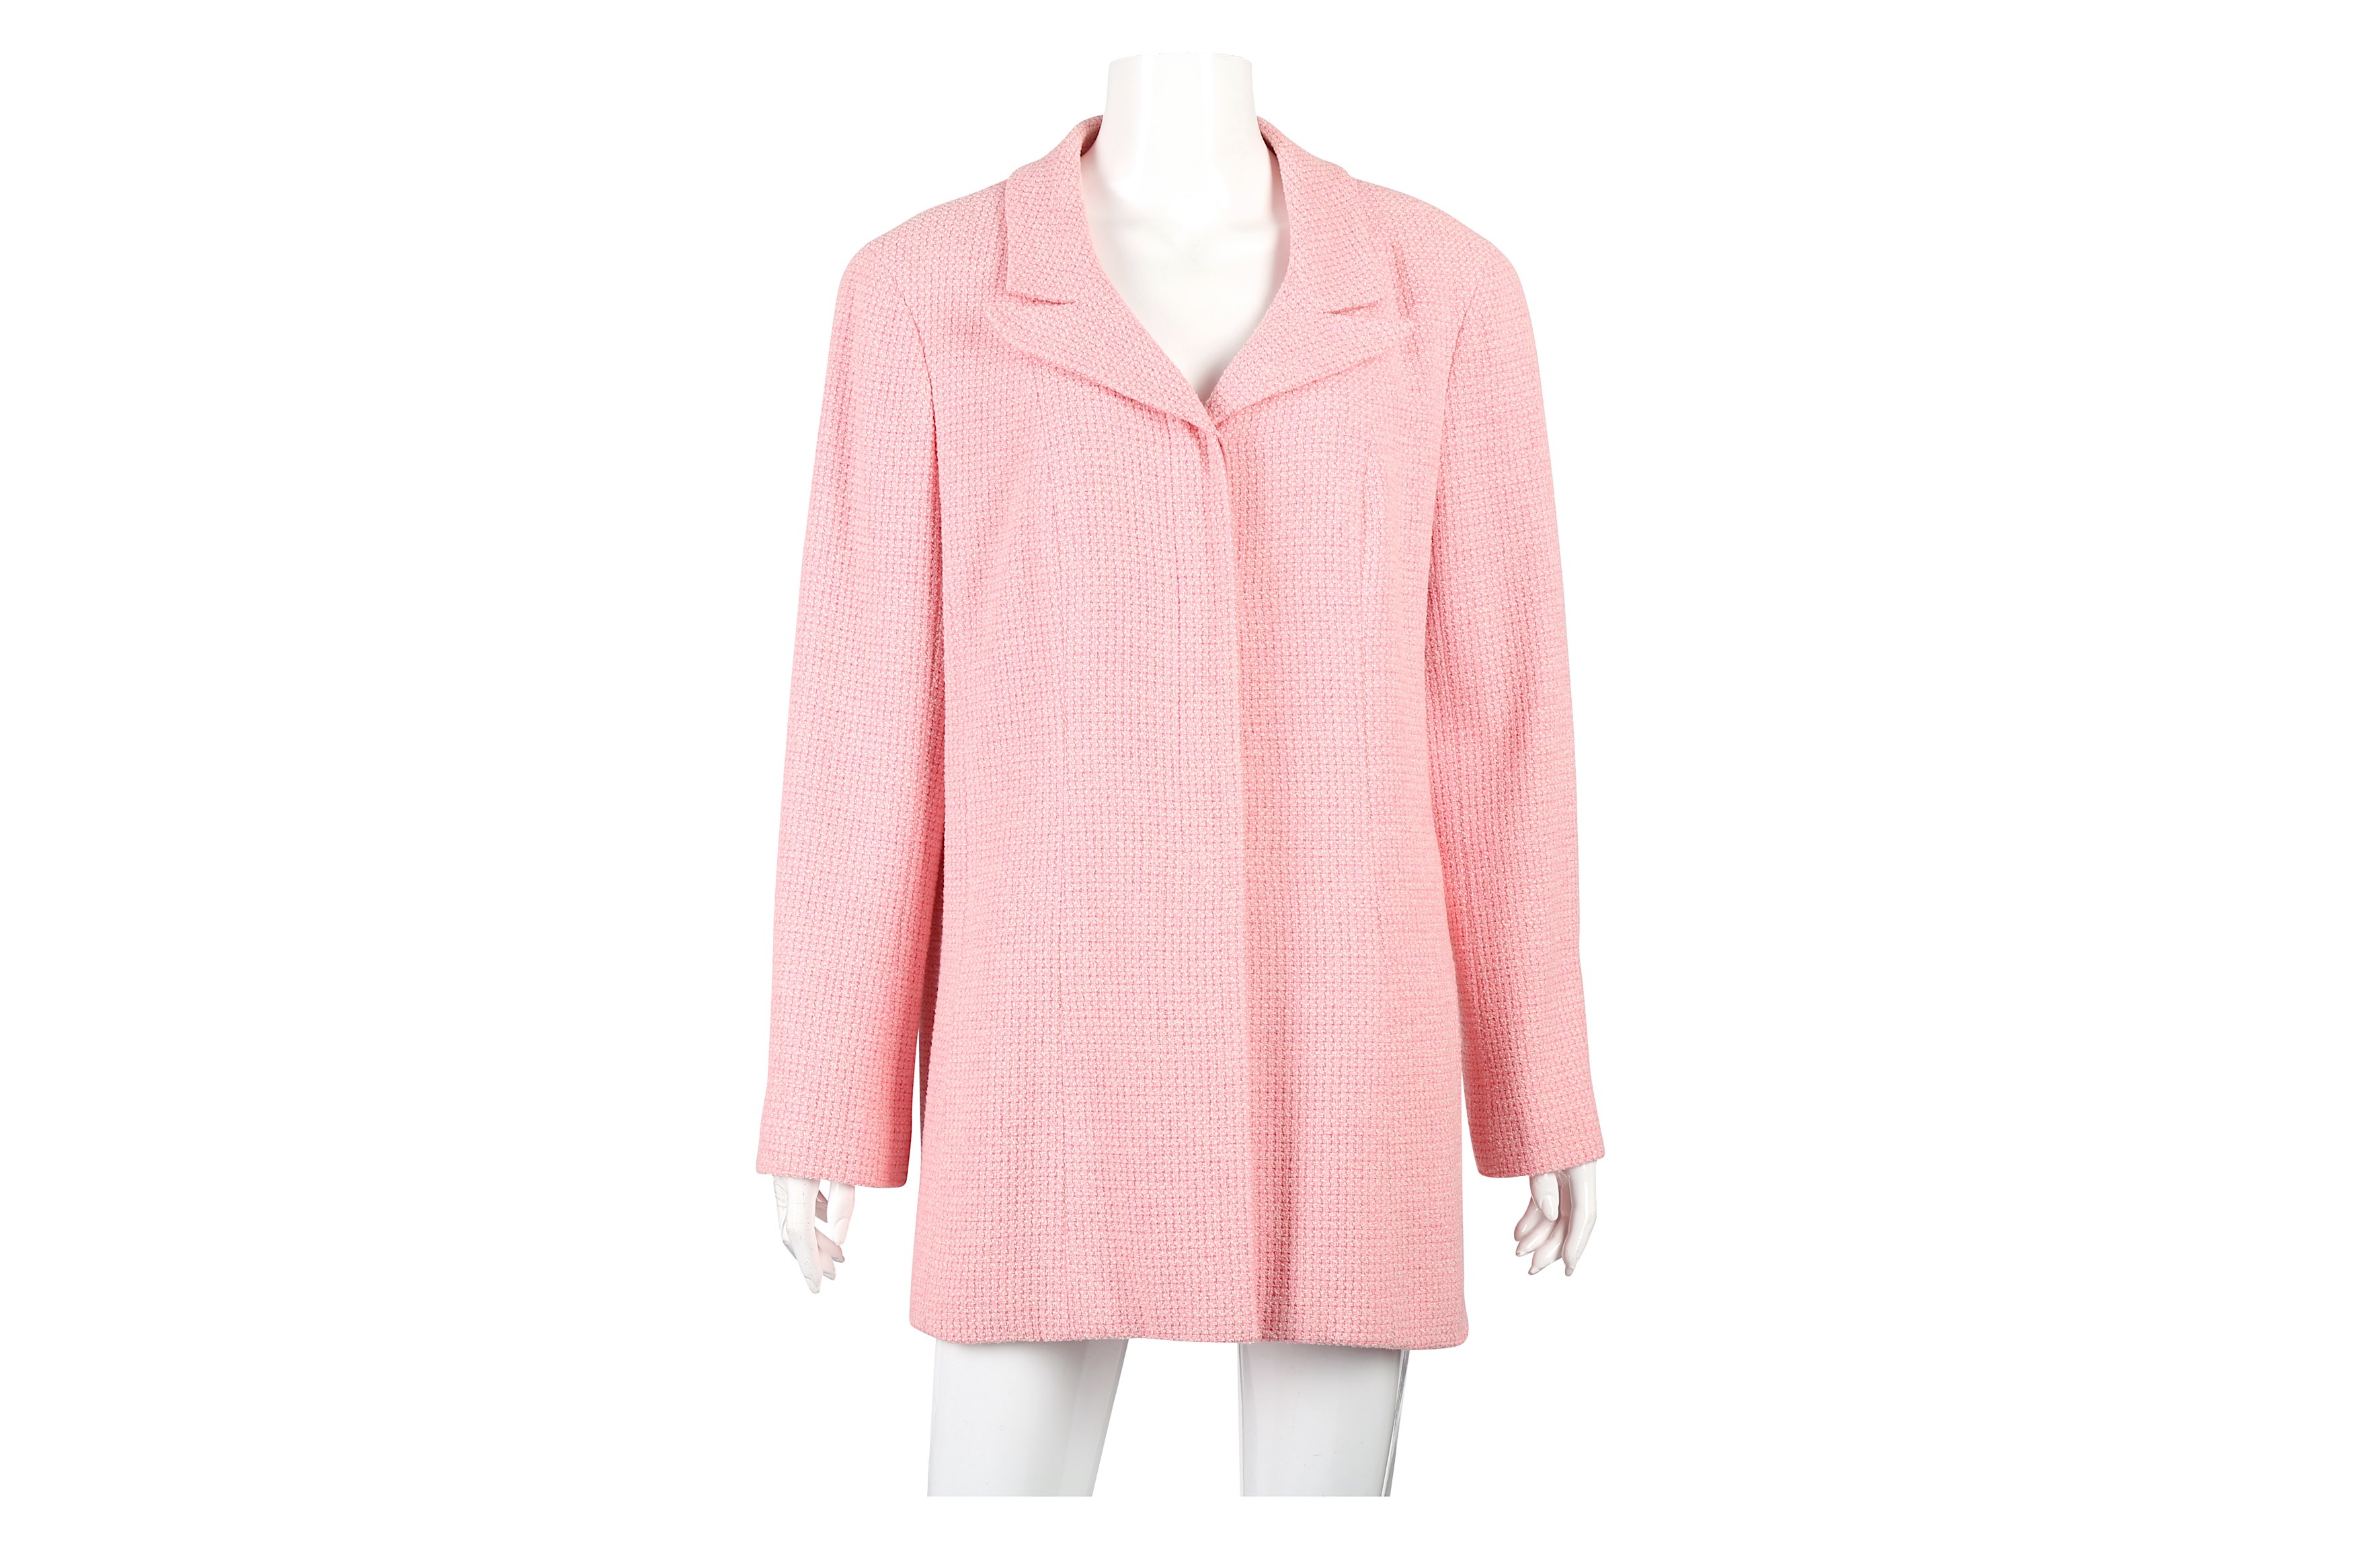 Chanel Pink Tweed Single Breasted Jacket - Size 46